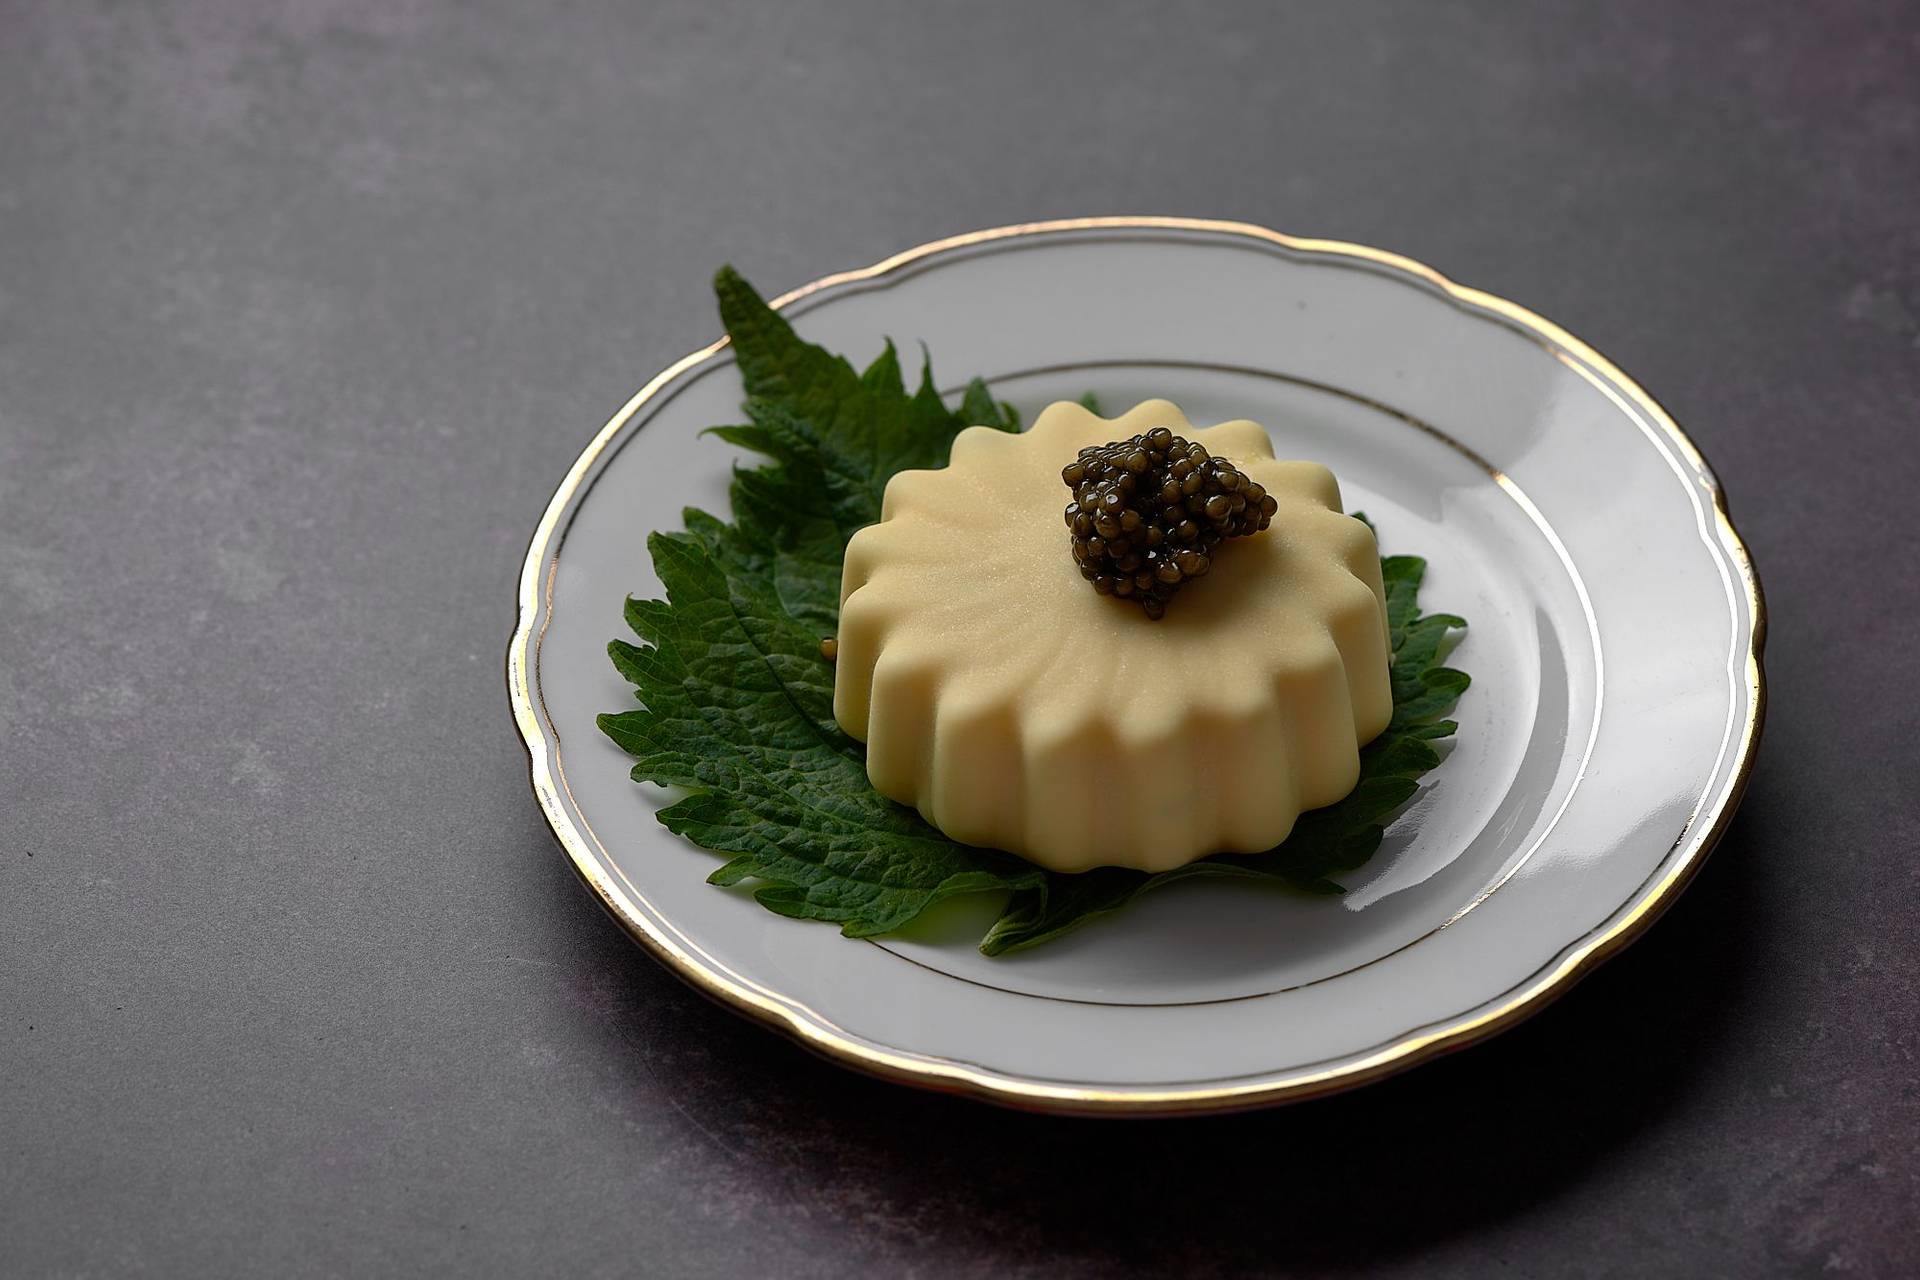 shiso and lime parfait white chocolate with caviar by food stylist ben donath at le duc salon